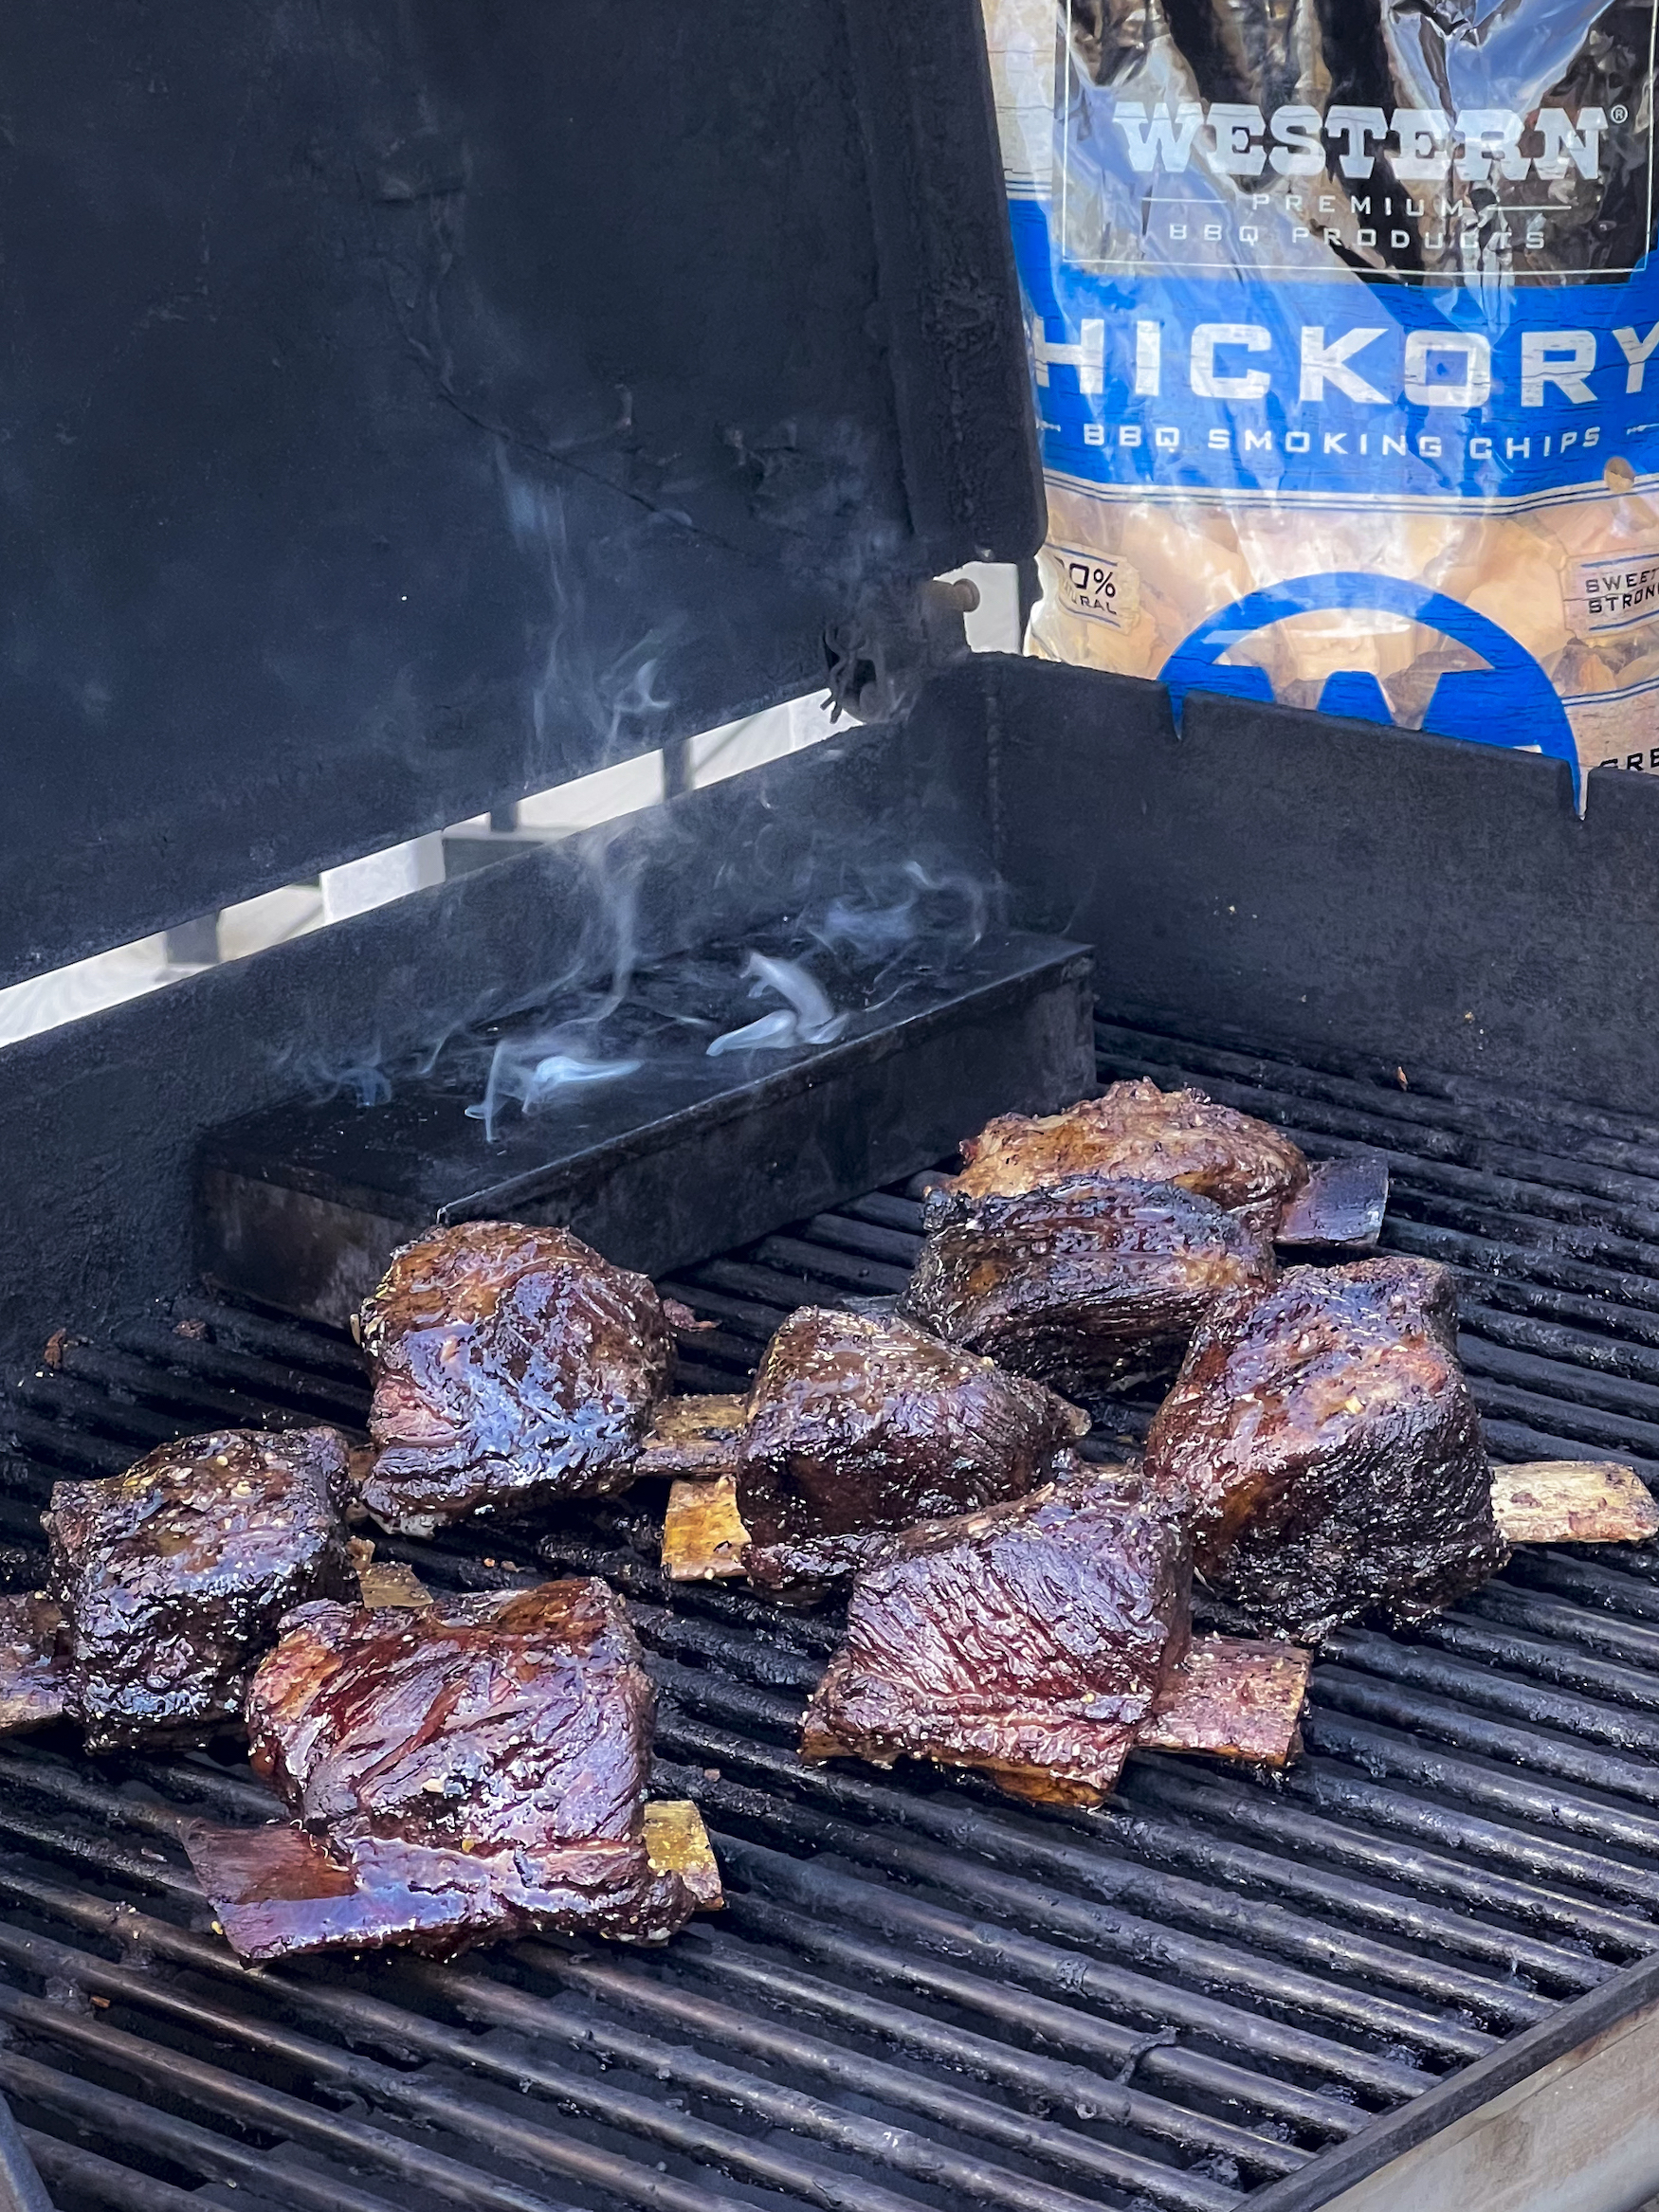 Short Ribs on a grill with a smoke drifting from a smoker box. A bag of Western Hickory Chips is in backdrop.